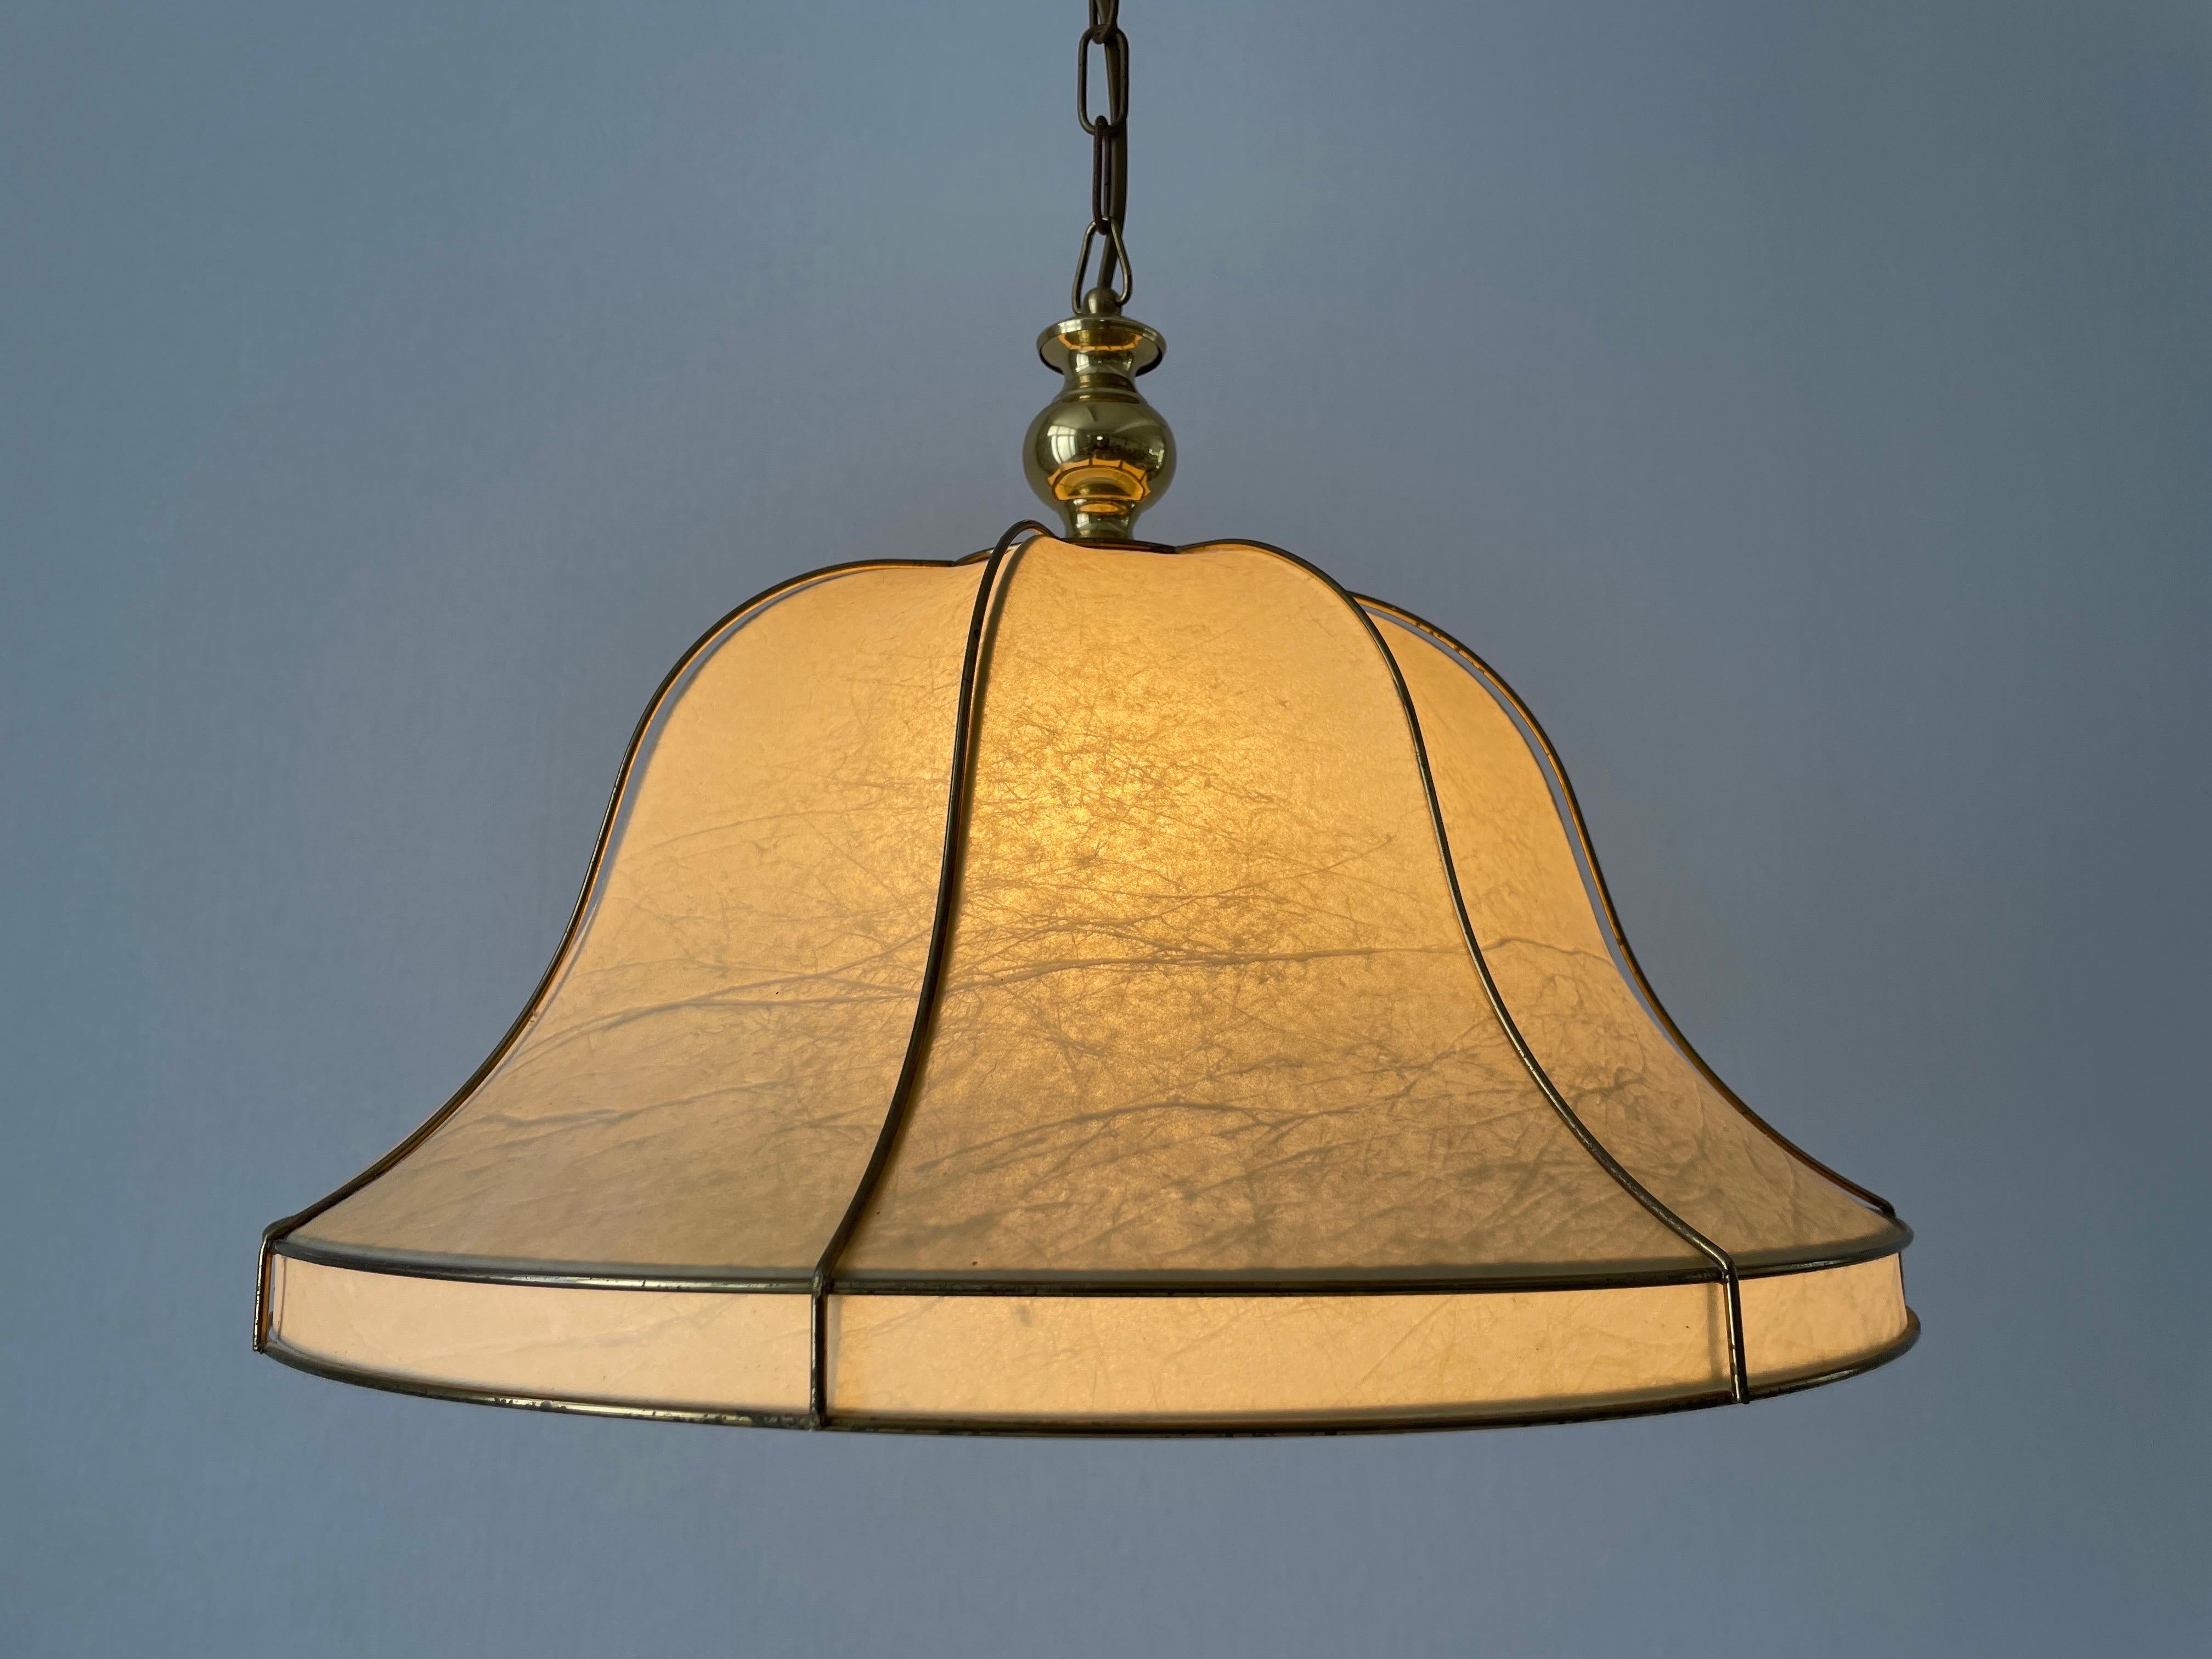 Cocoon Pendant Lamp with Gold Metal Shade Frame by Goldkant, 1960s, Germany For Sale 3